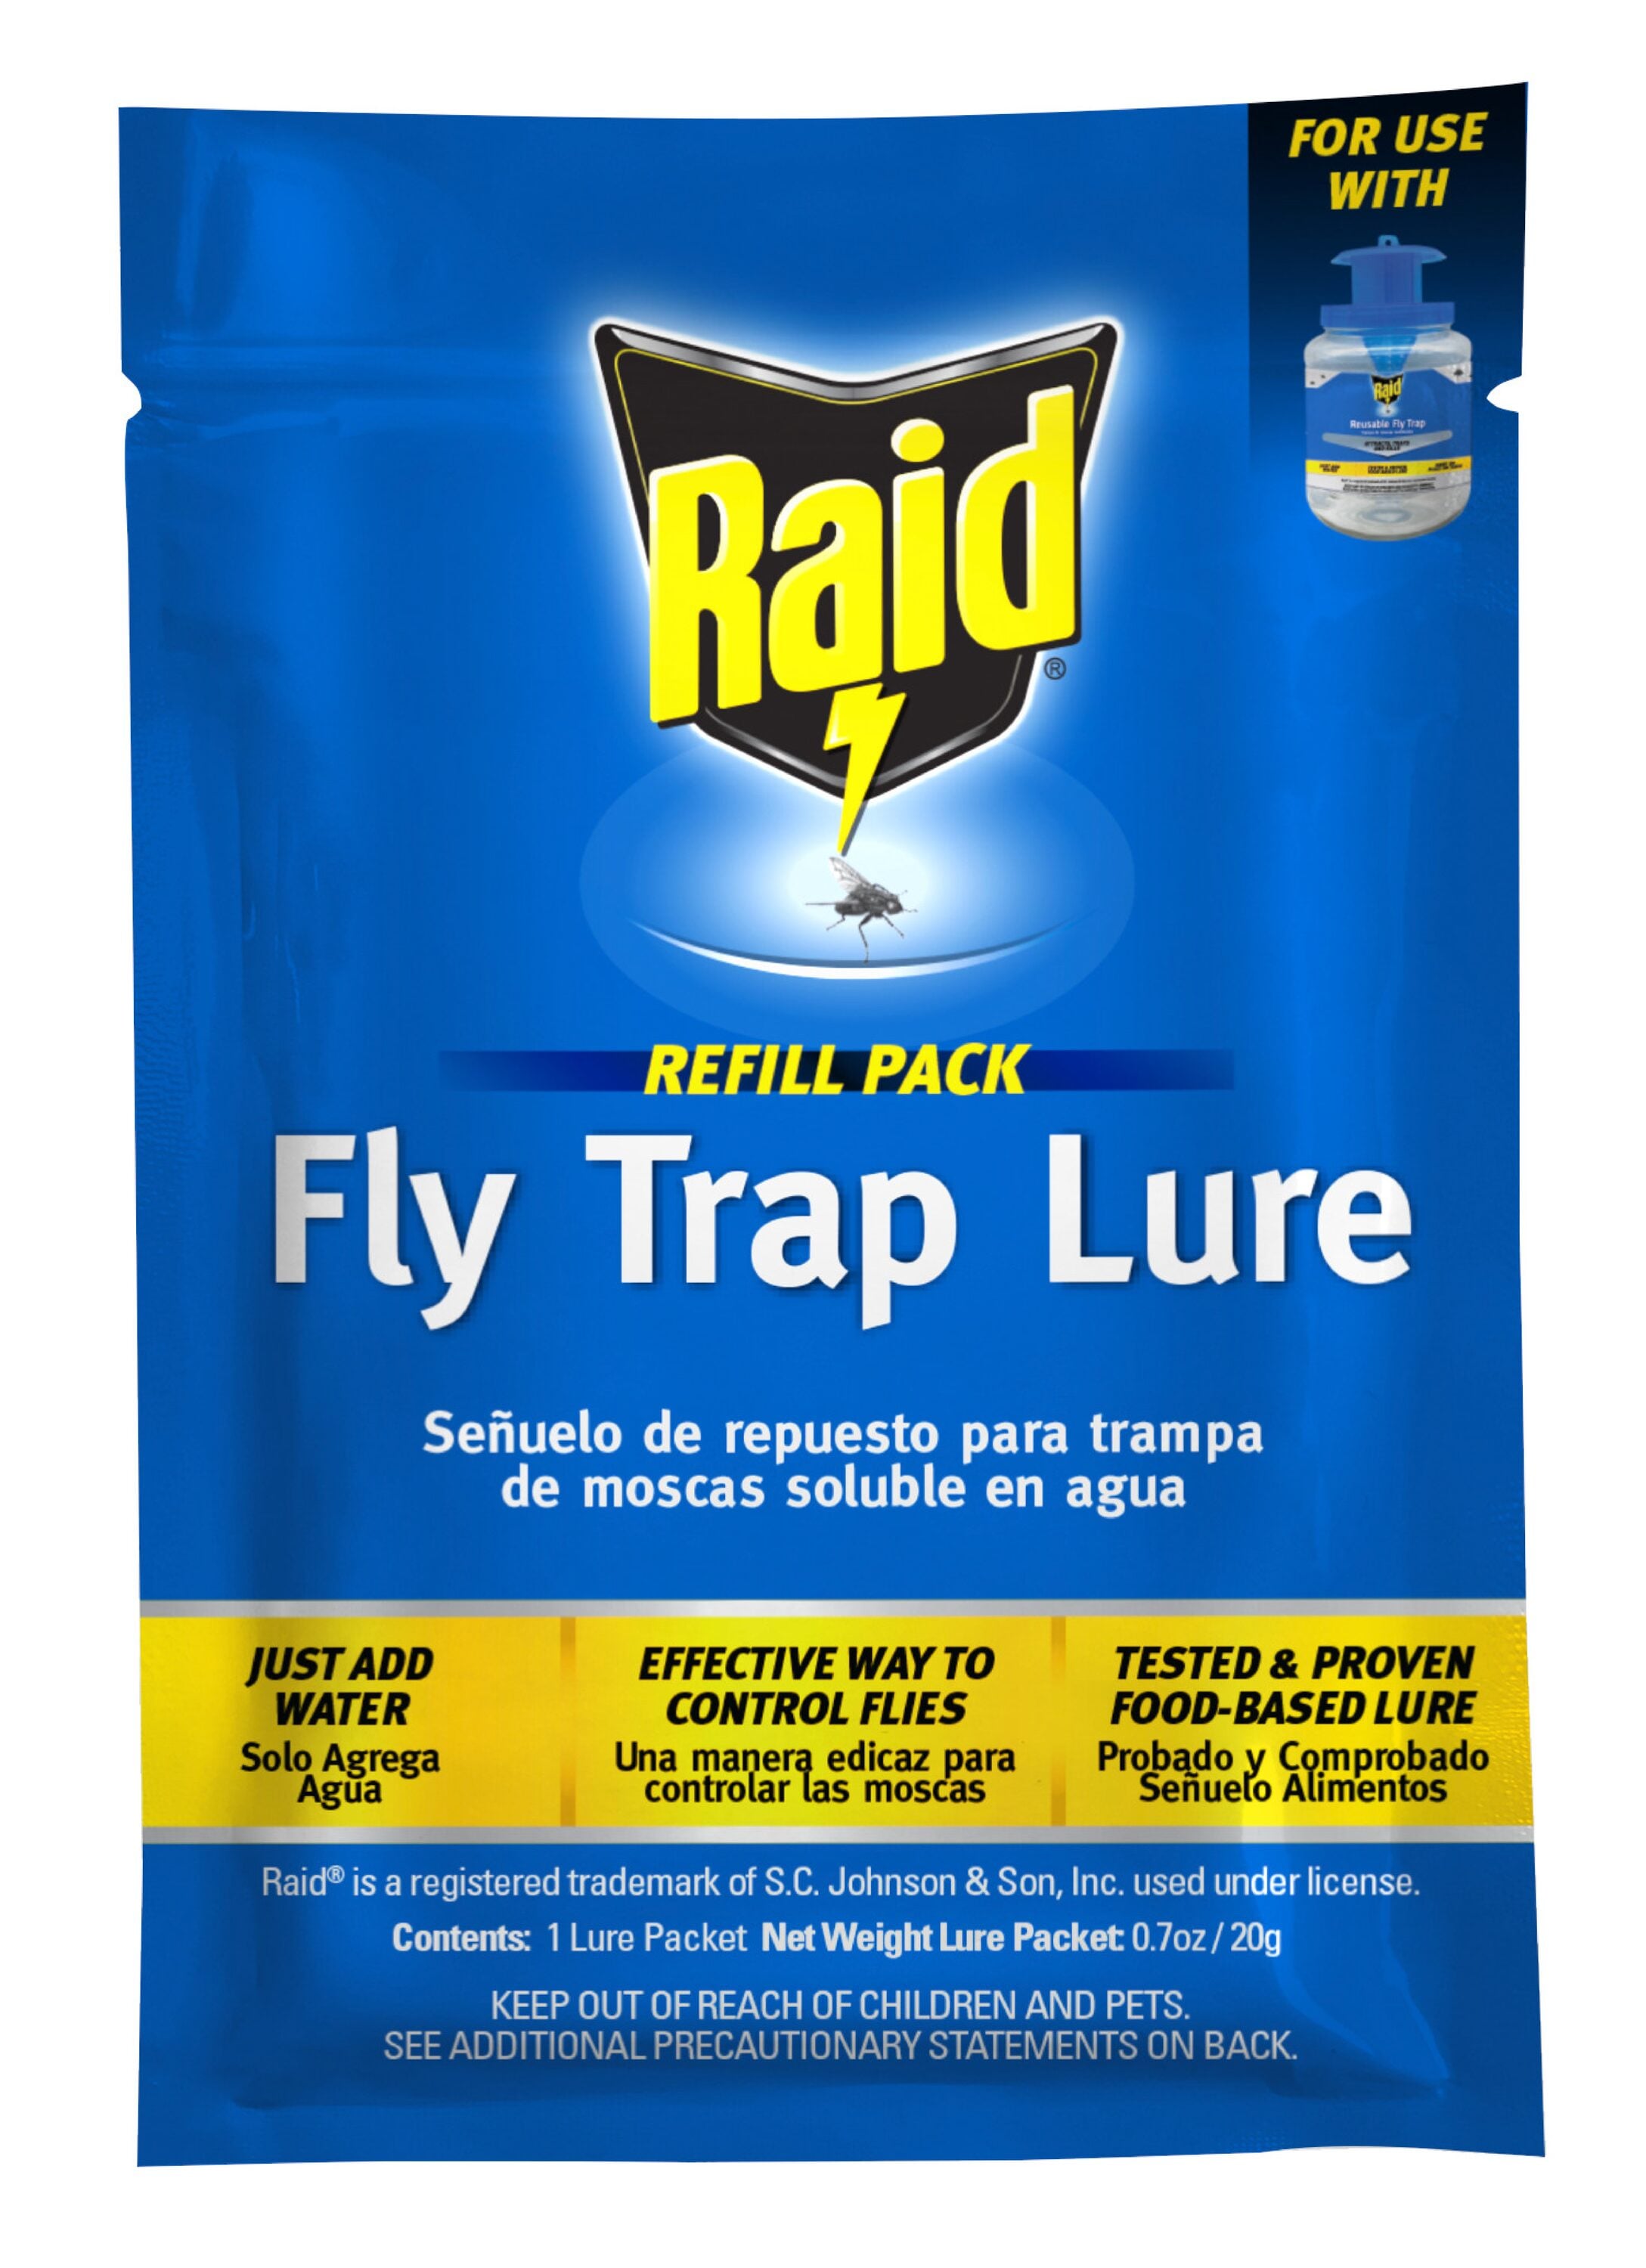 Raid Fly Stick, Each Trap Catches up to 150 Flies, Indoor and Outdoor Use  (1 Pack) 